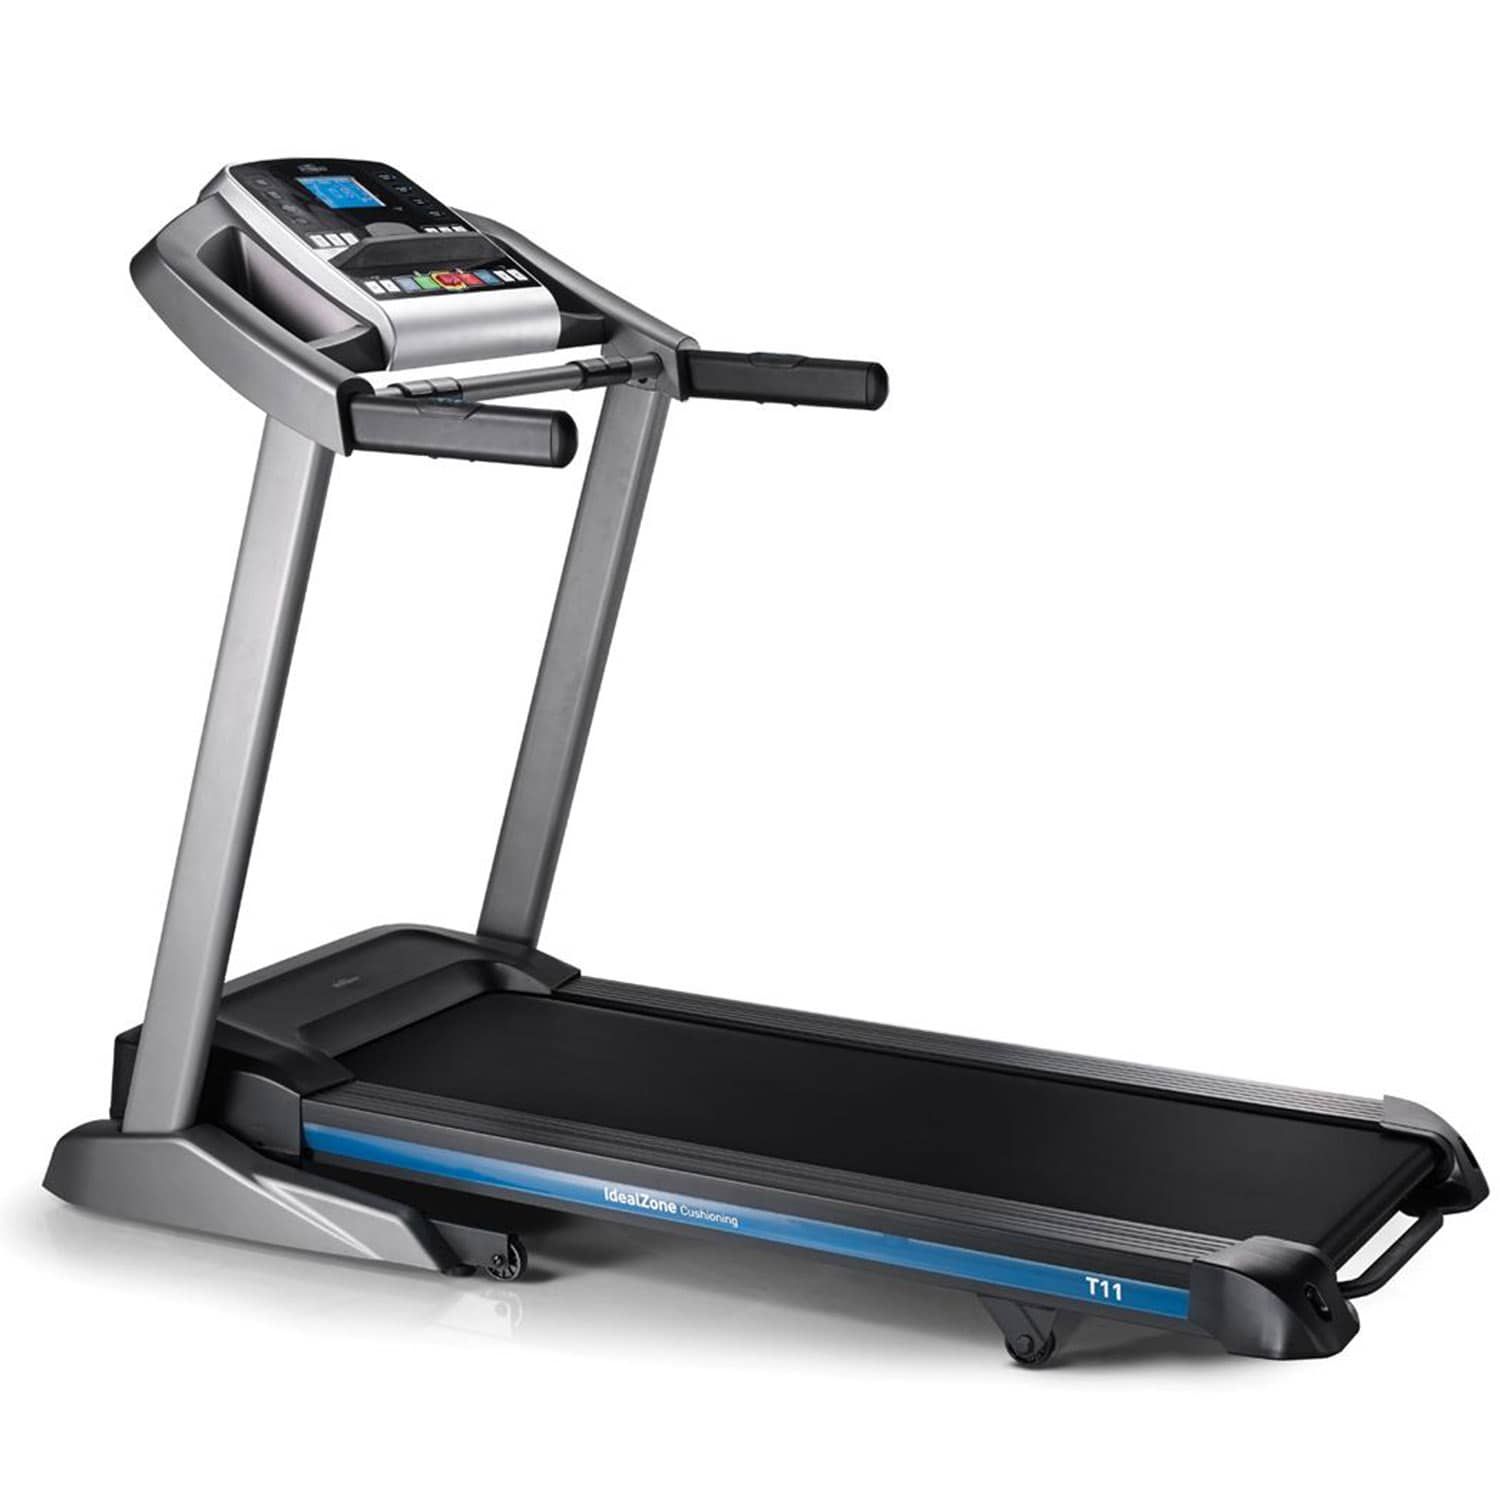 Fitness Buy Tempo price Horizon CE in Treadmill at House Power best Online UAE- T11 Fitness